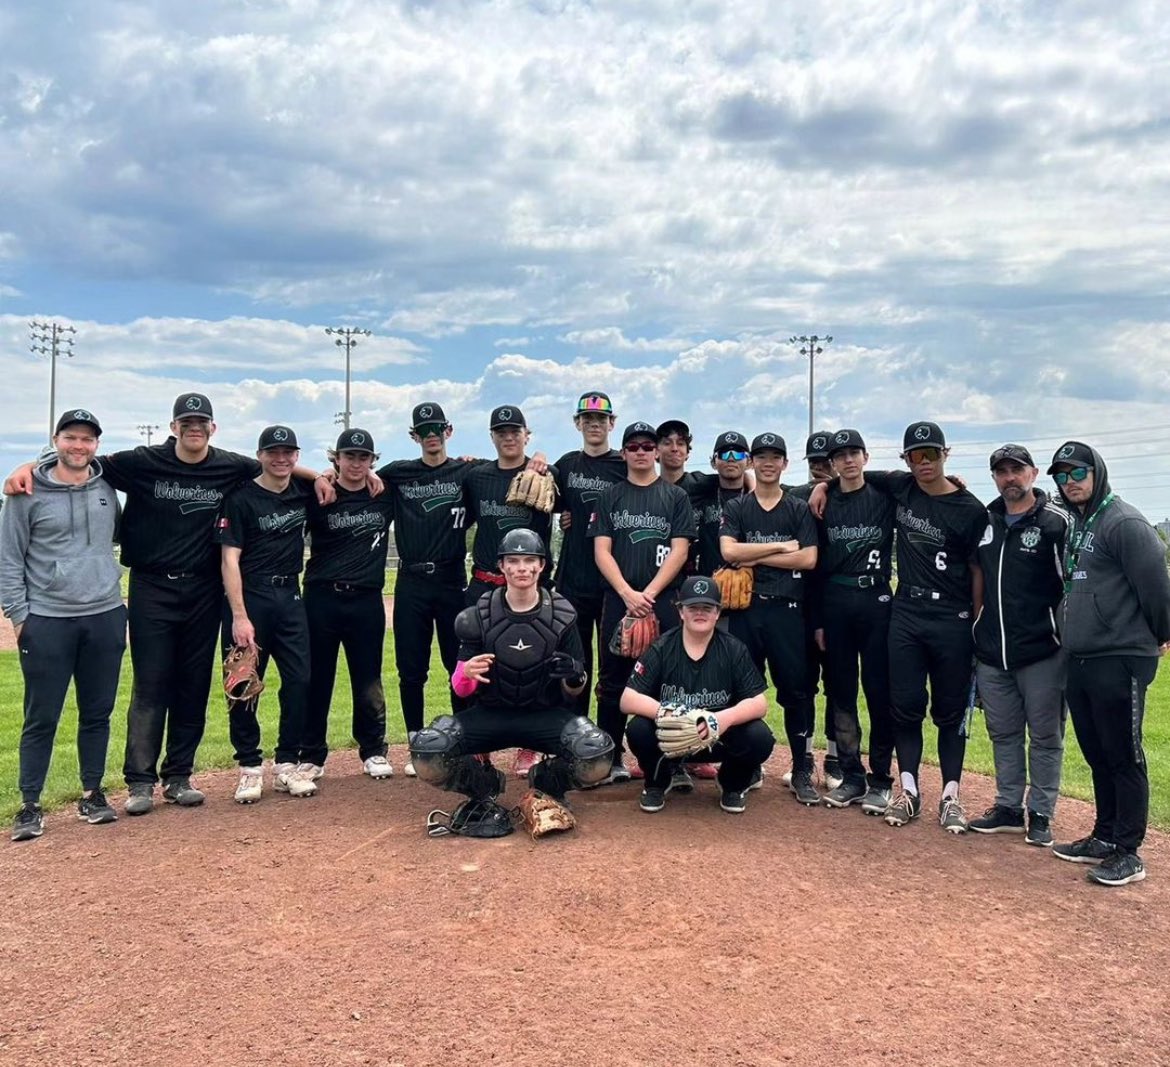 Congrats to our @StPaulCSS1 Boys Baseball team on their great start to the season! Our #Wolverines are 2-0 beating Cawthra Park and Applewood today. TY to coaches Marciano, Kangas, and Vicars for supporting our #StudentAthletes.